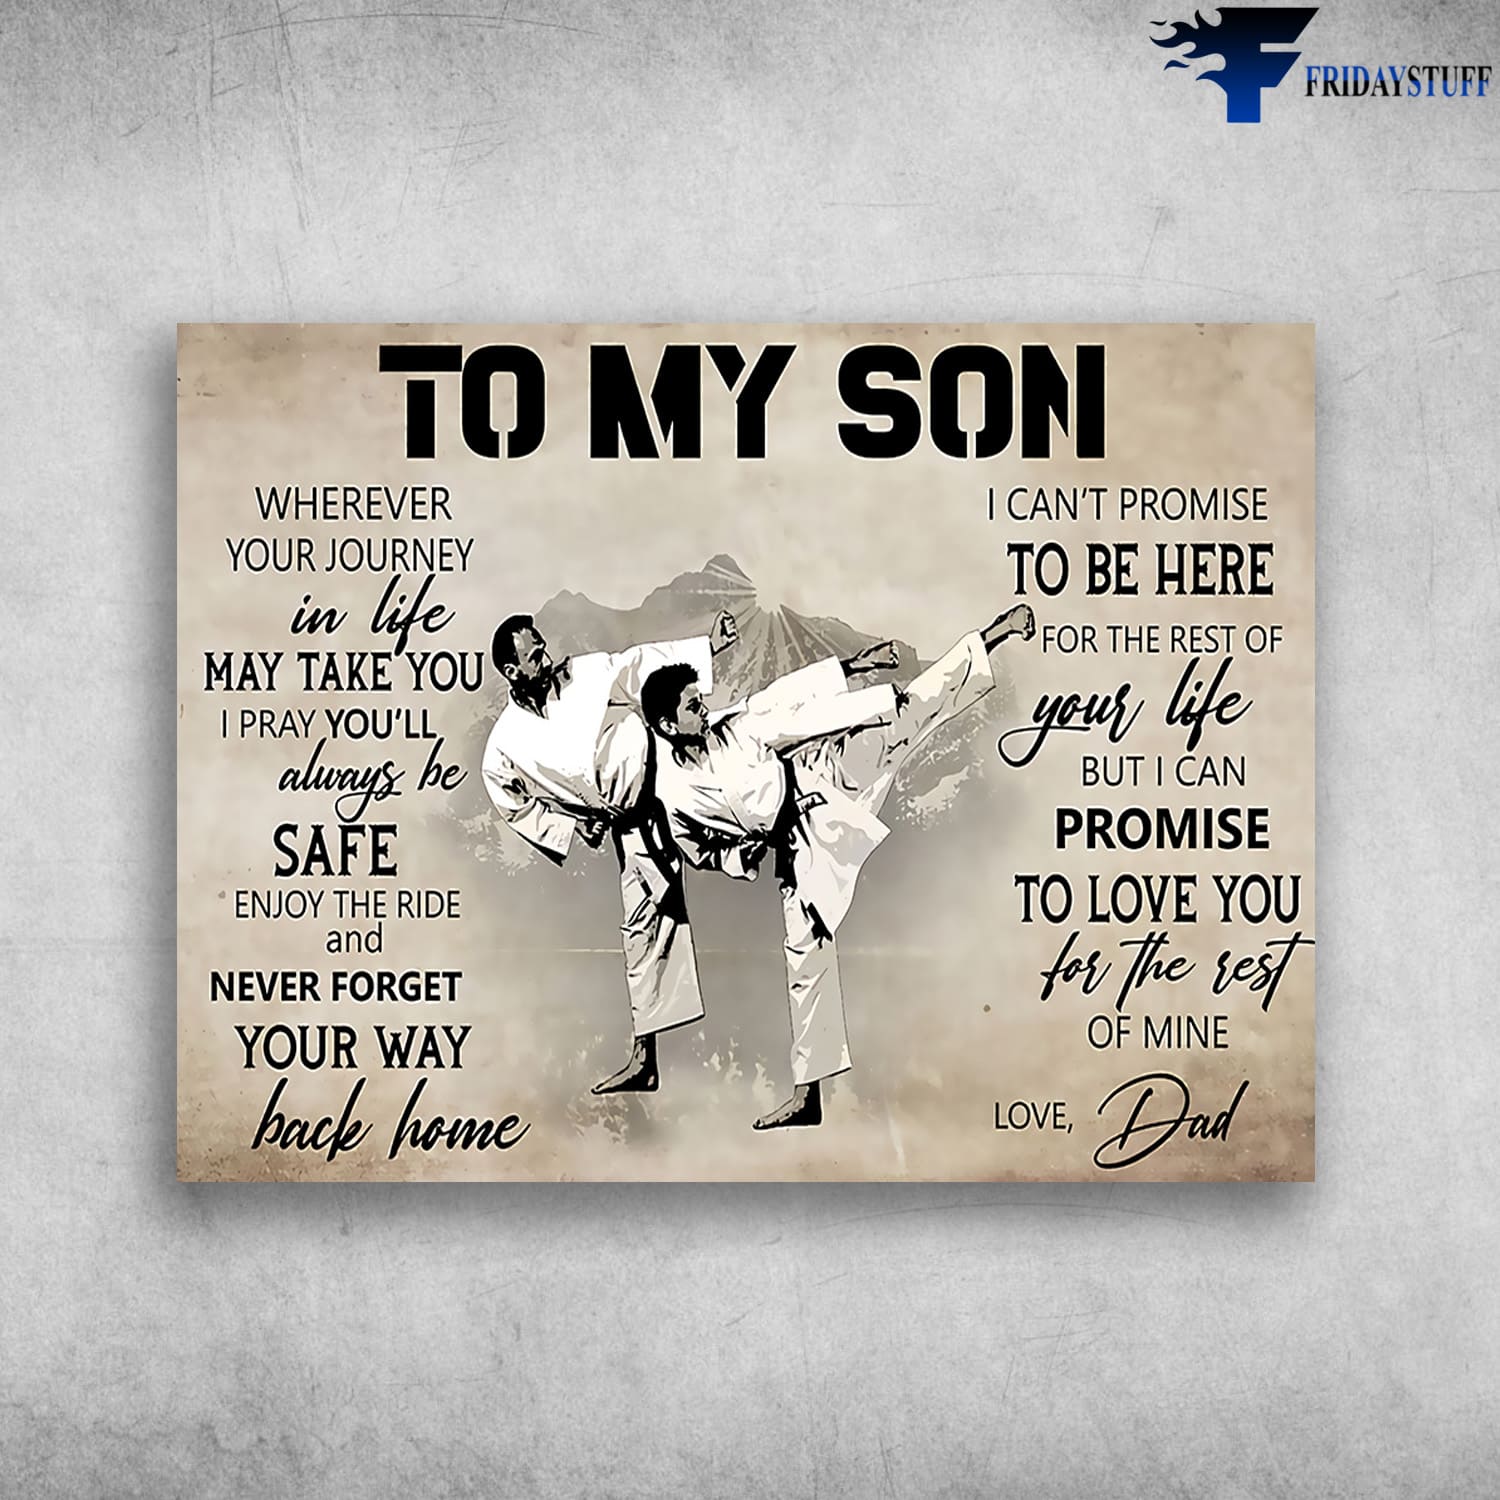 Dad And Son, Karate Poster, Wherever Your Journey In Life, May Take You, I Pray You'll Always Be Safe, Enjoy The RIde And Never Forget Your Way Back Home